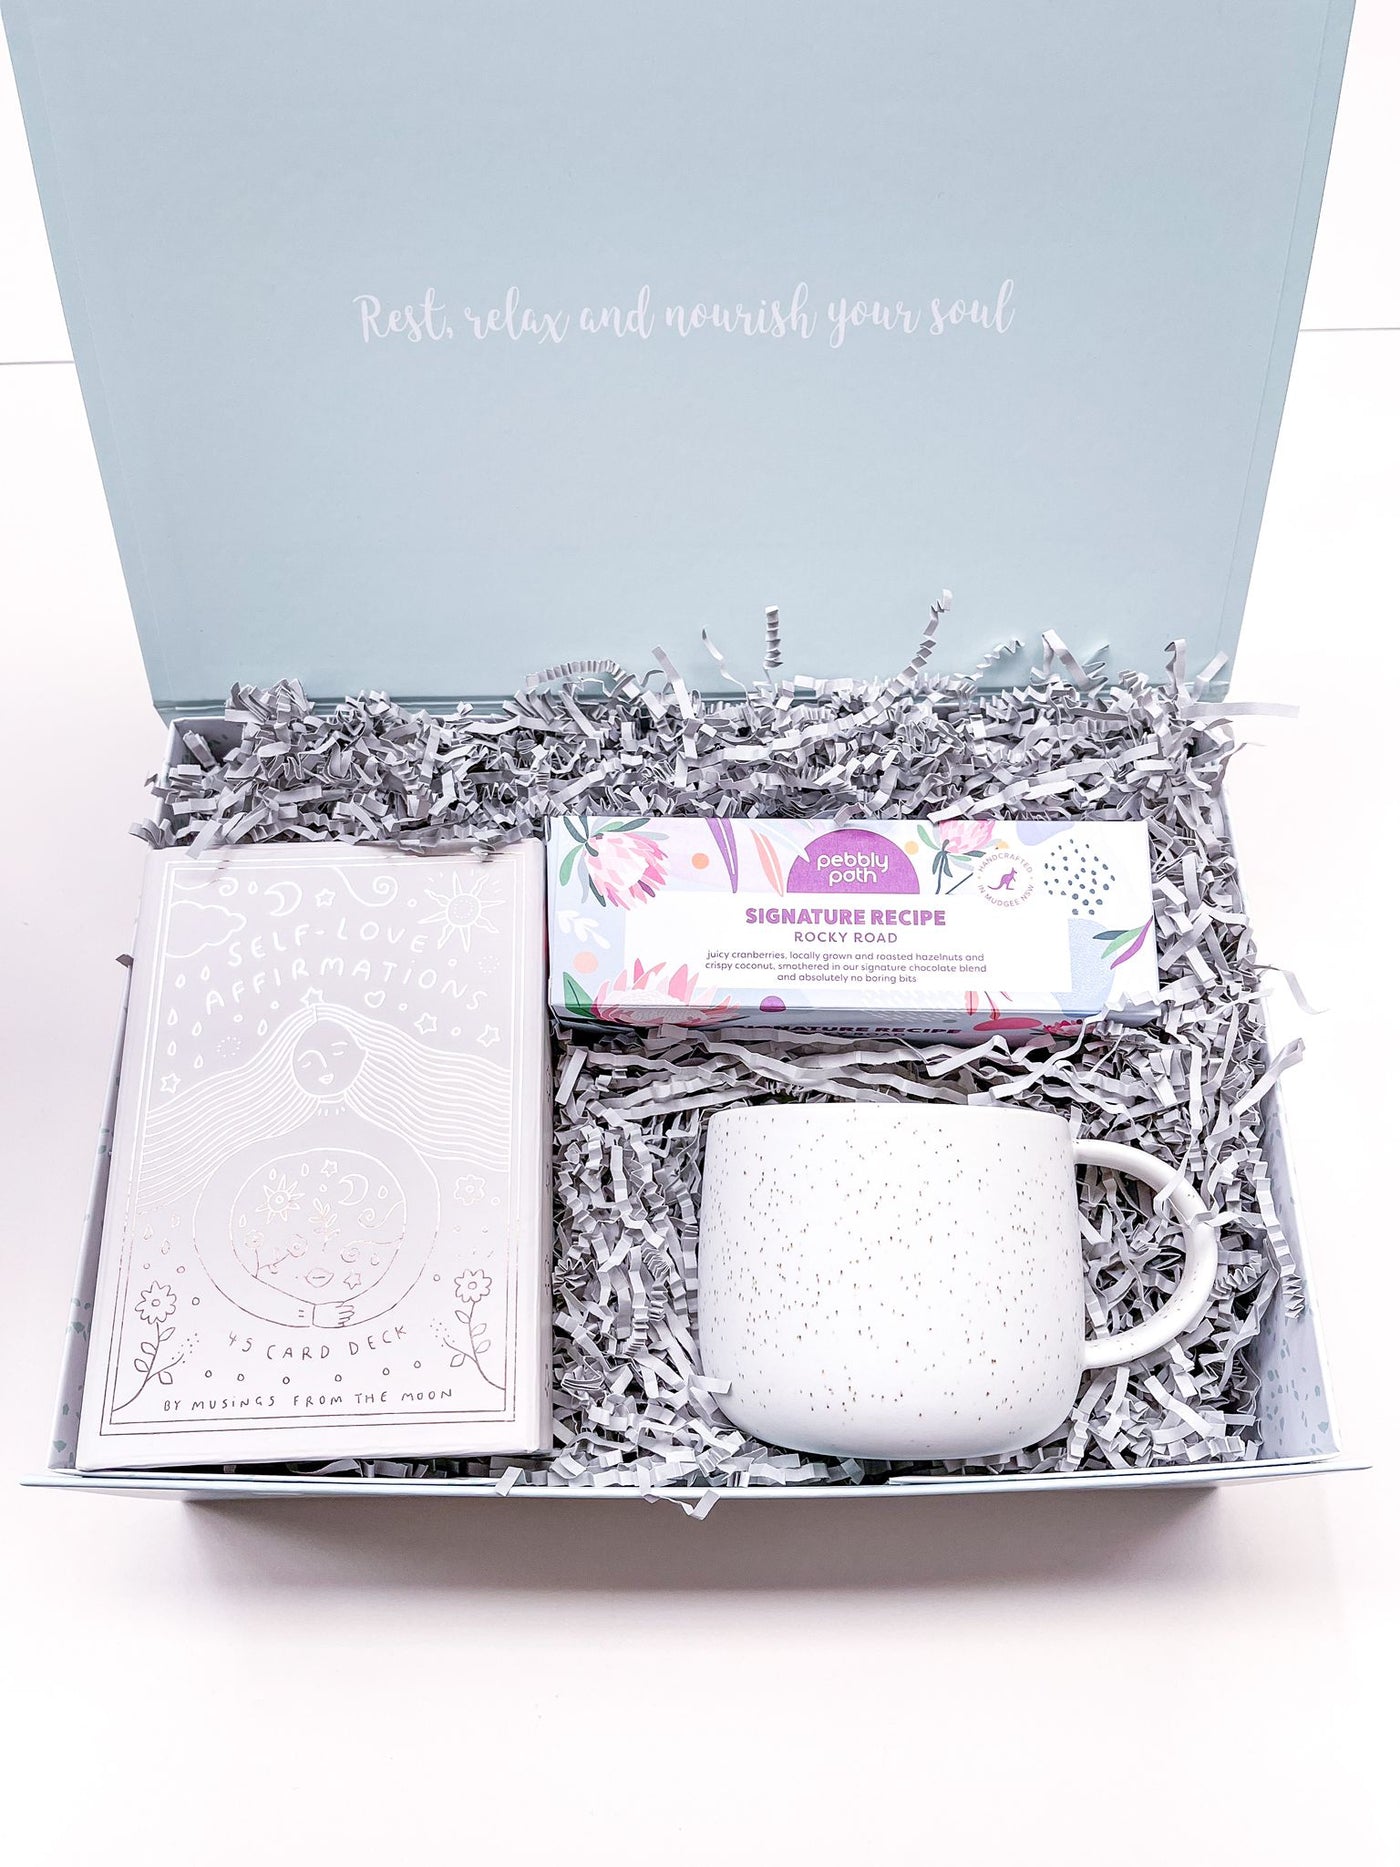 Permission to Love Yourself Care Package - Feel Better Box 